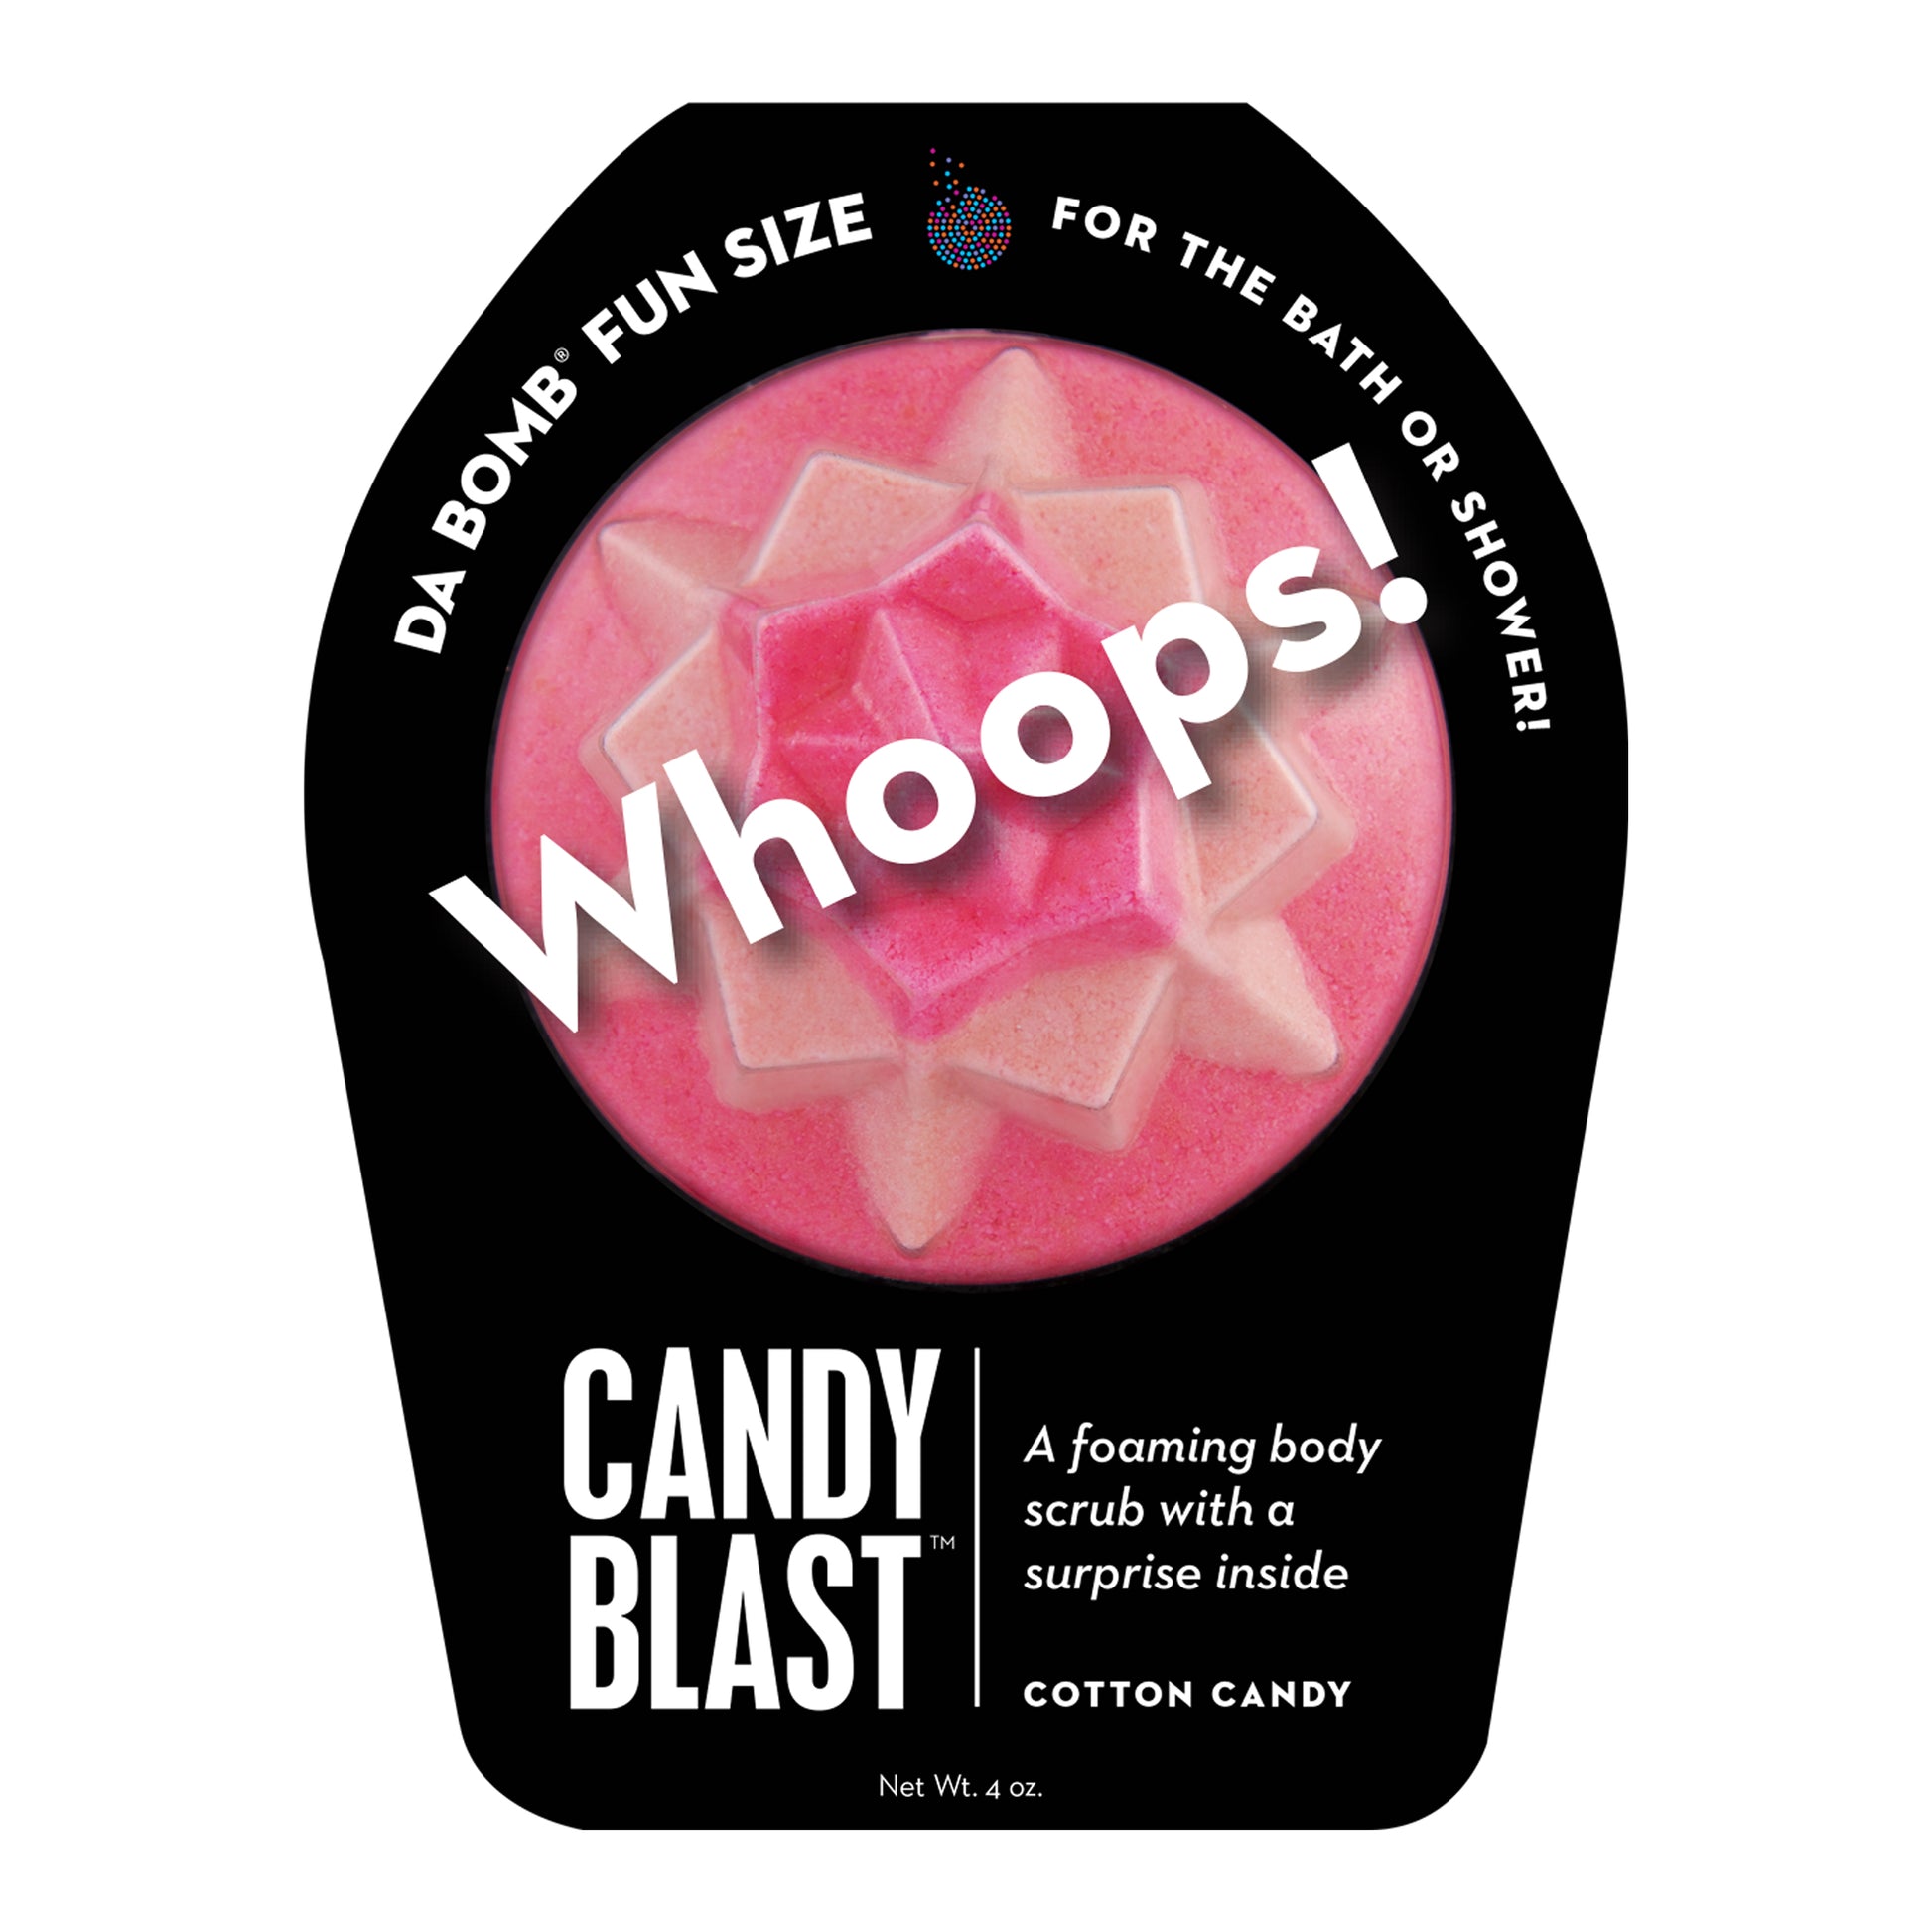 Whoops fun size candy blast!